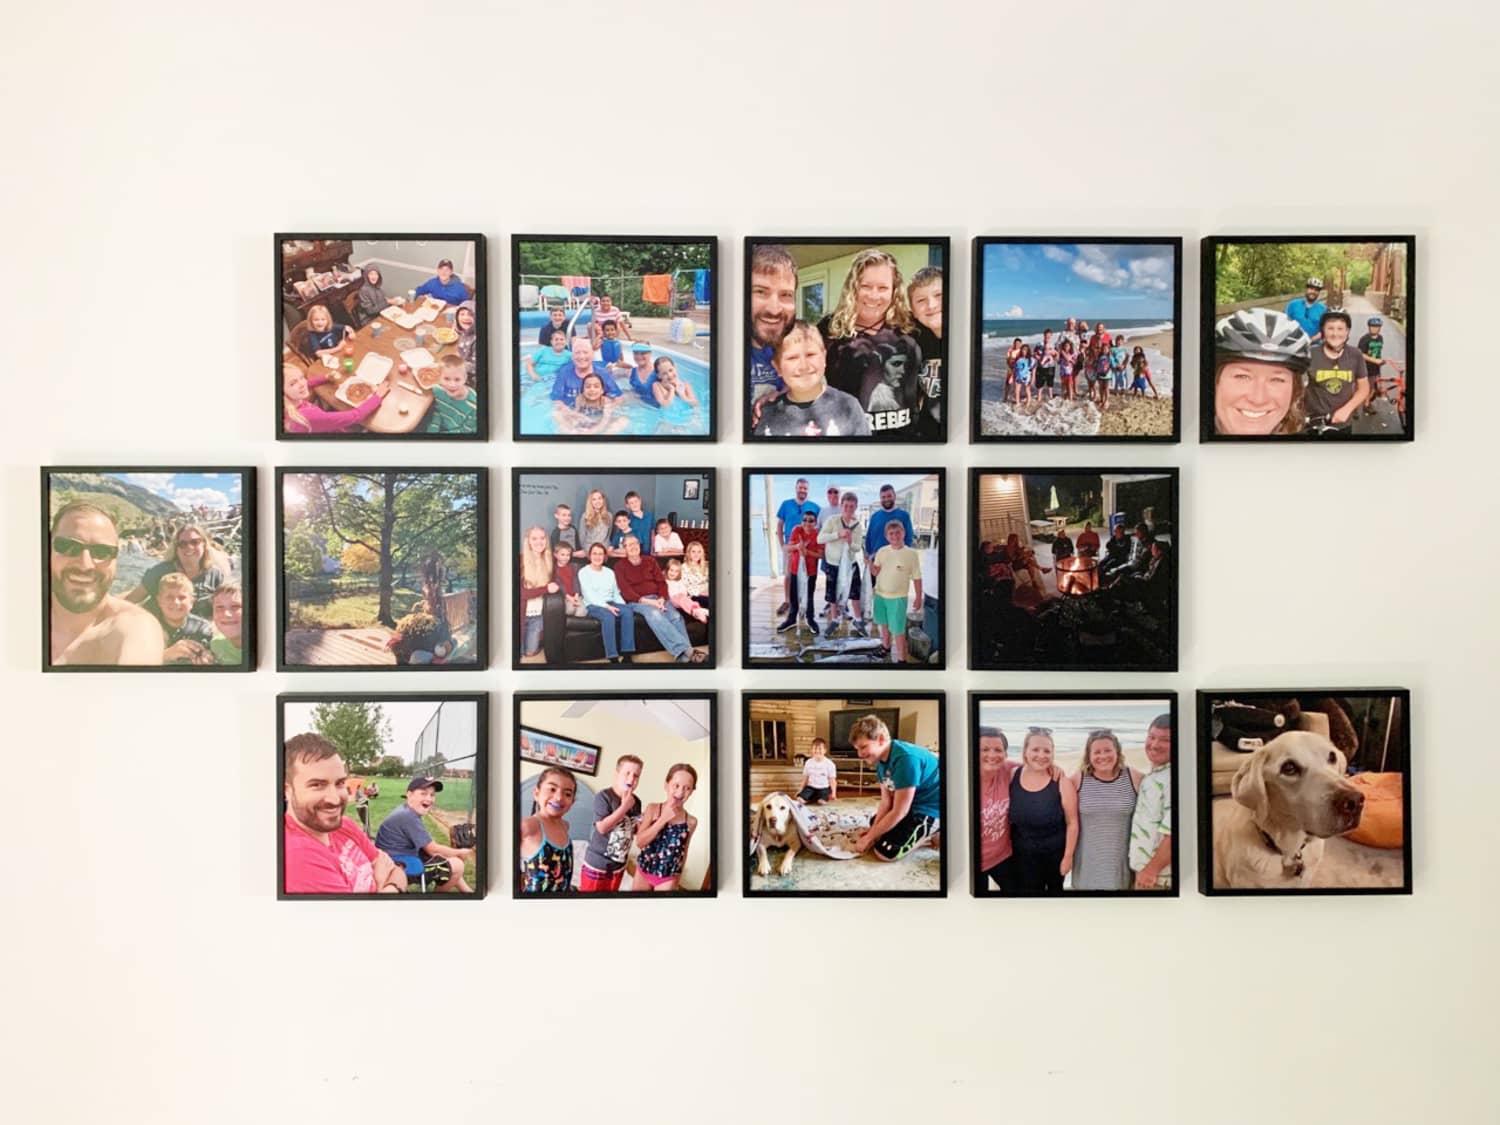 Personalize your walls for less with up to $50 off at Mixtiles - CNET